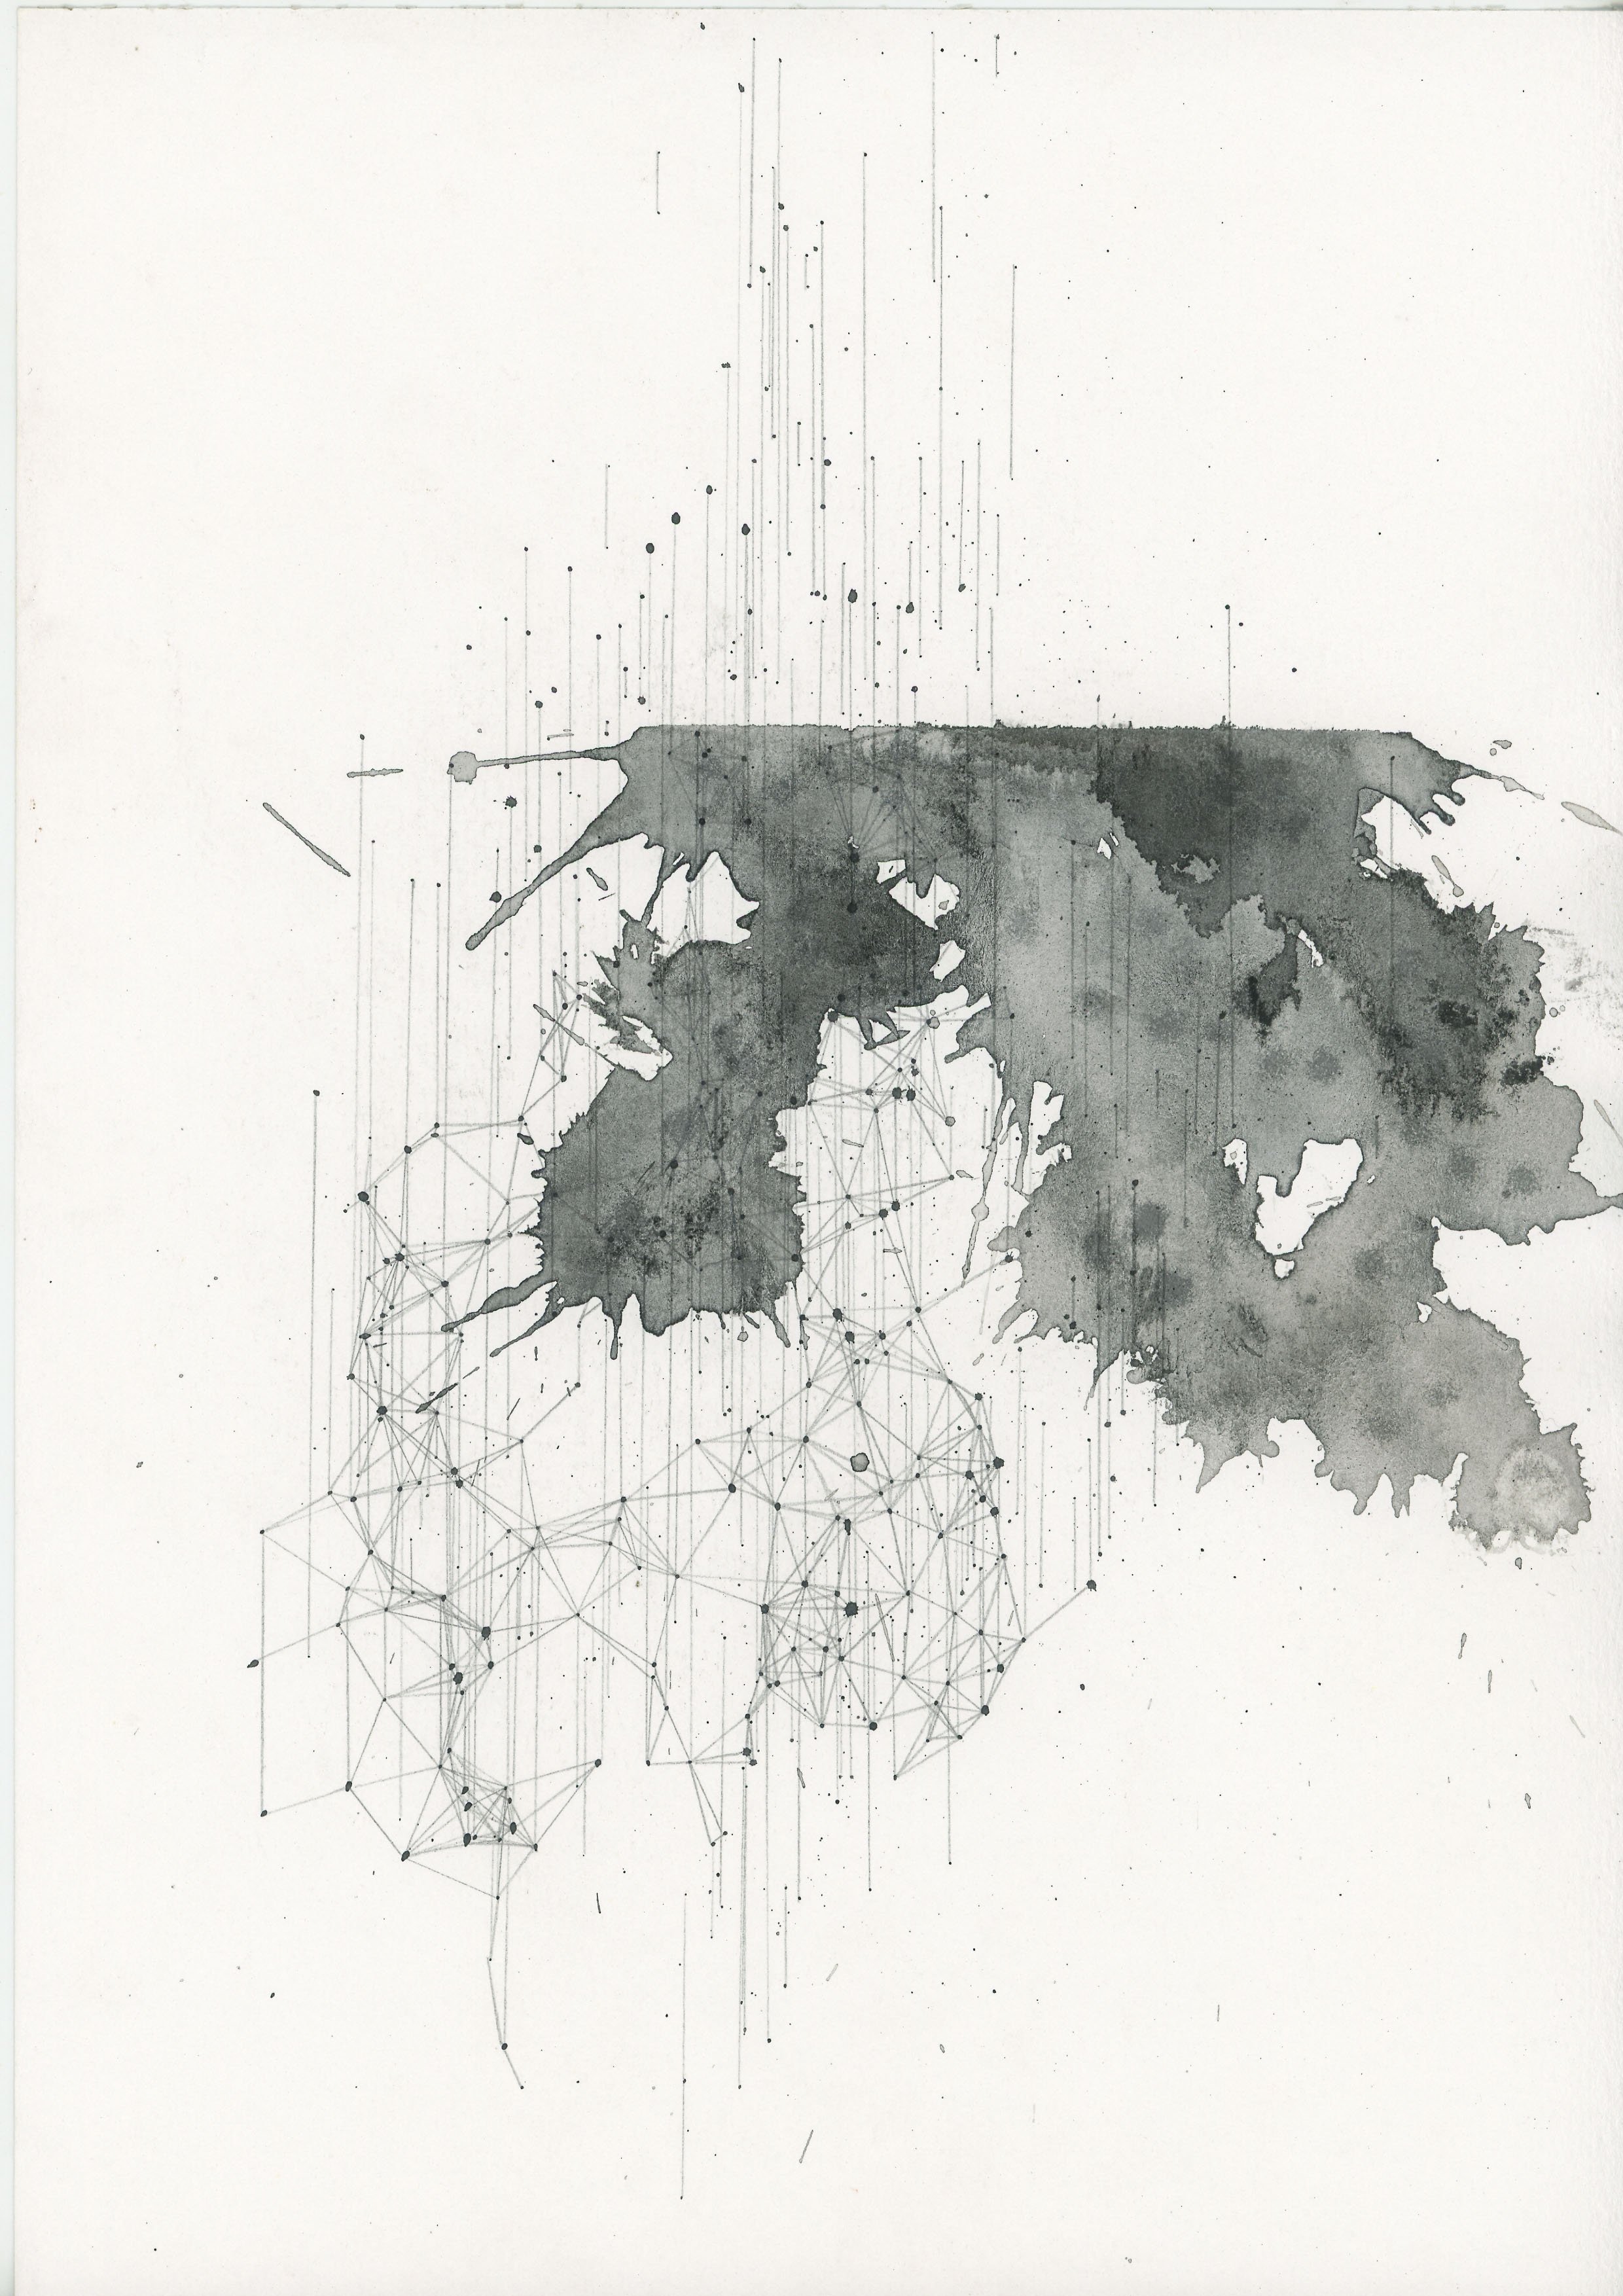    connection, disconnection and motion 1-8.   2015. Ink, watercolor and pencil on paper.&nbsp;59 x 84 cm 